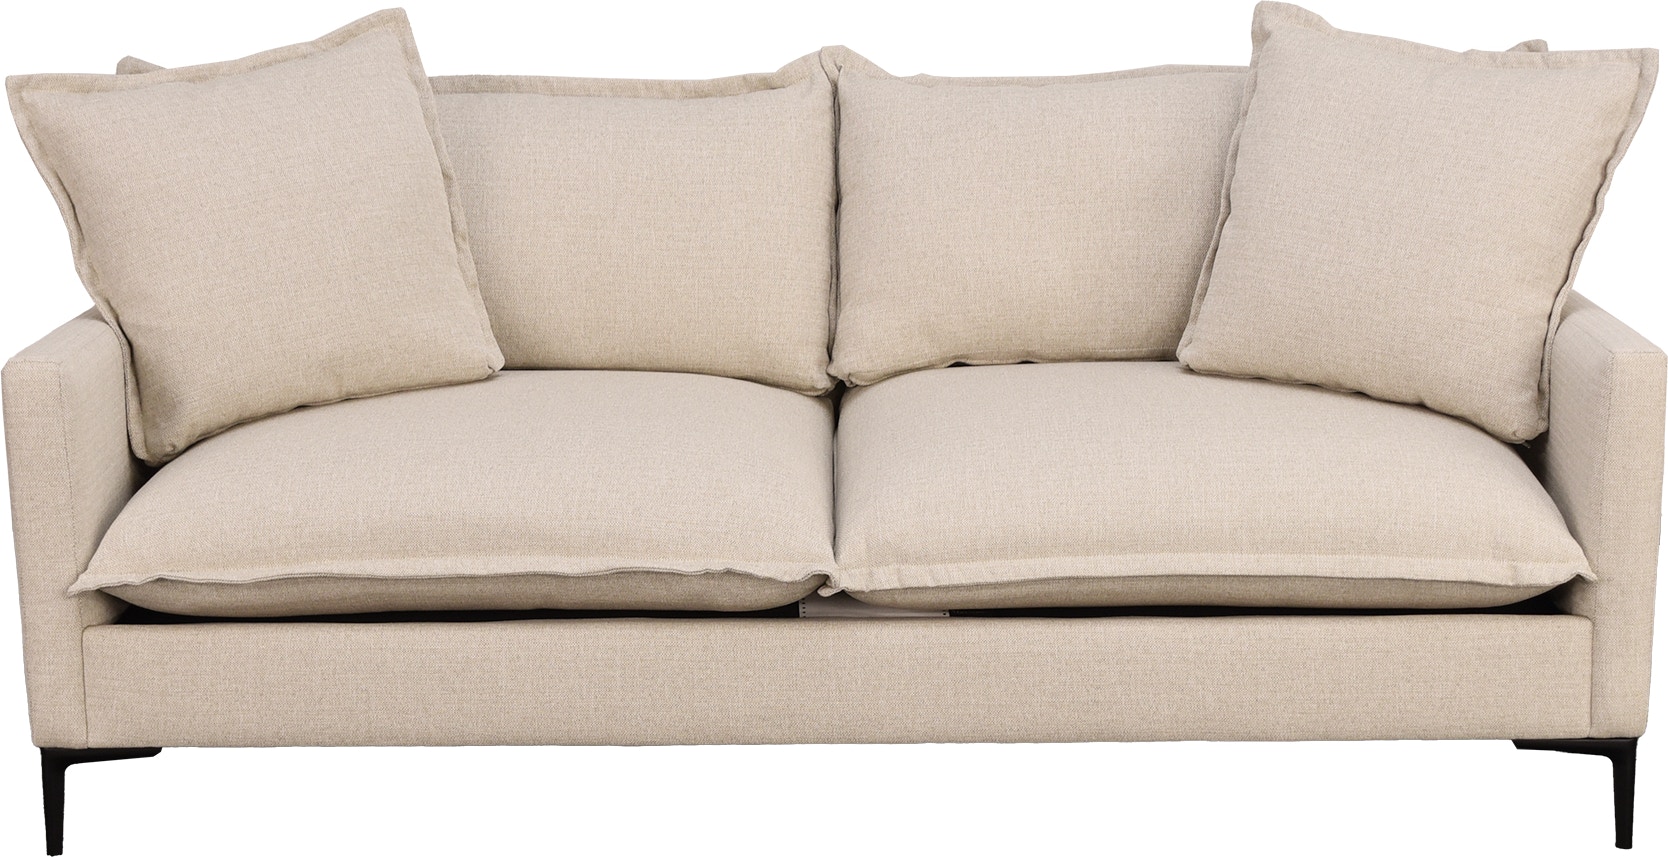 Max Home HORNSBY SOFA